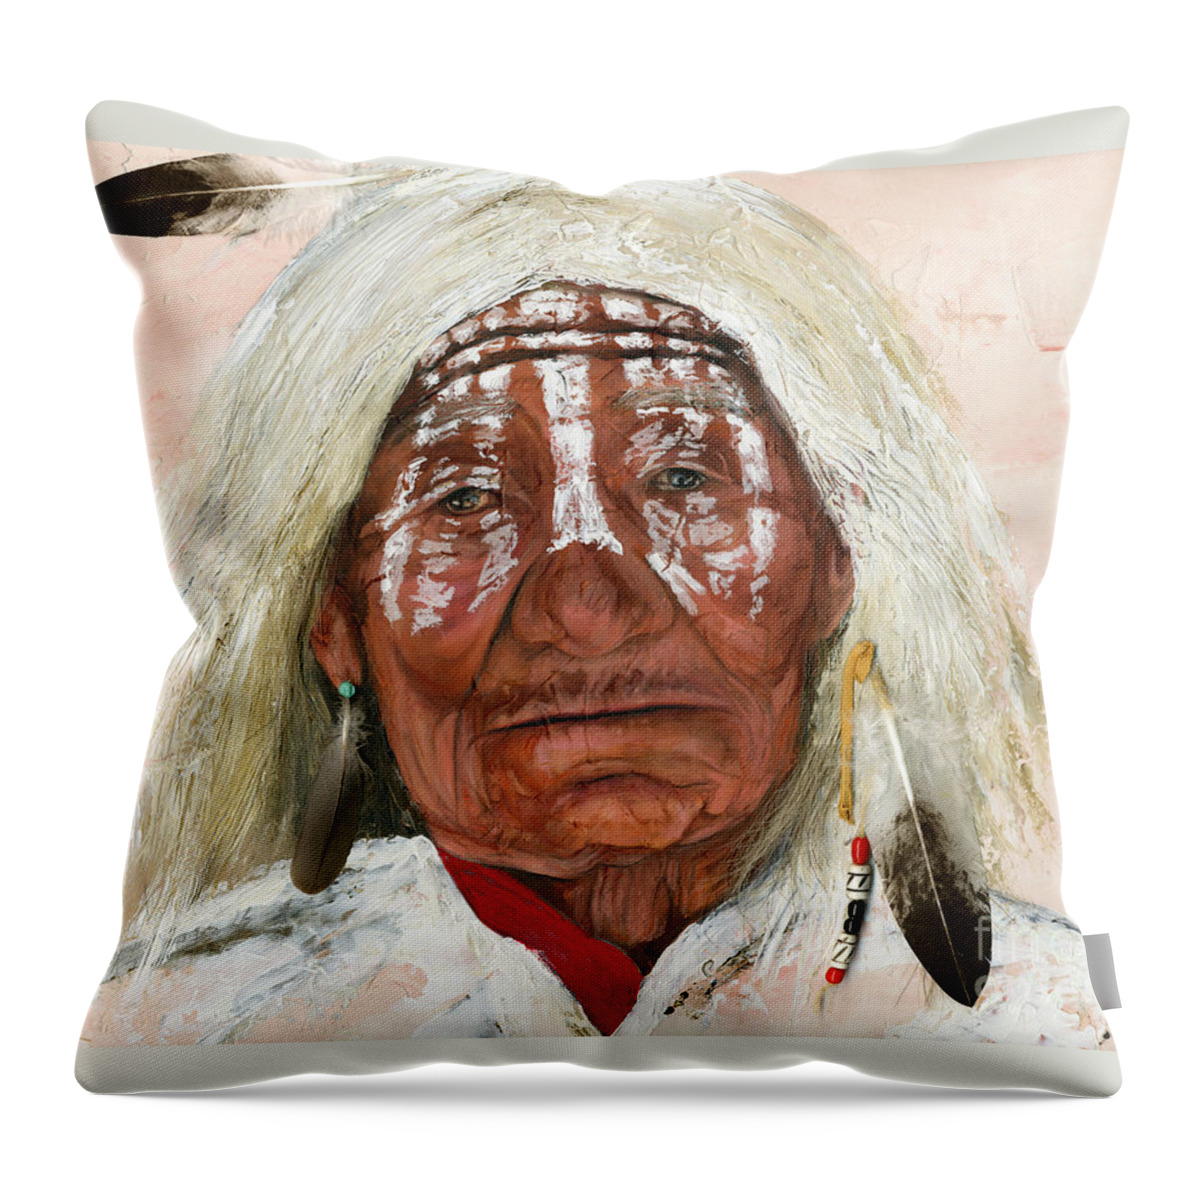 Southwest Art Throw Pillow featuring the painting Ghost Shaman by J W Baker